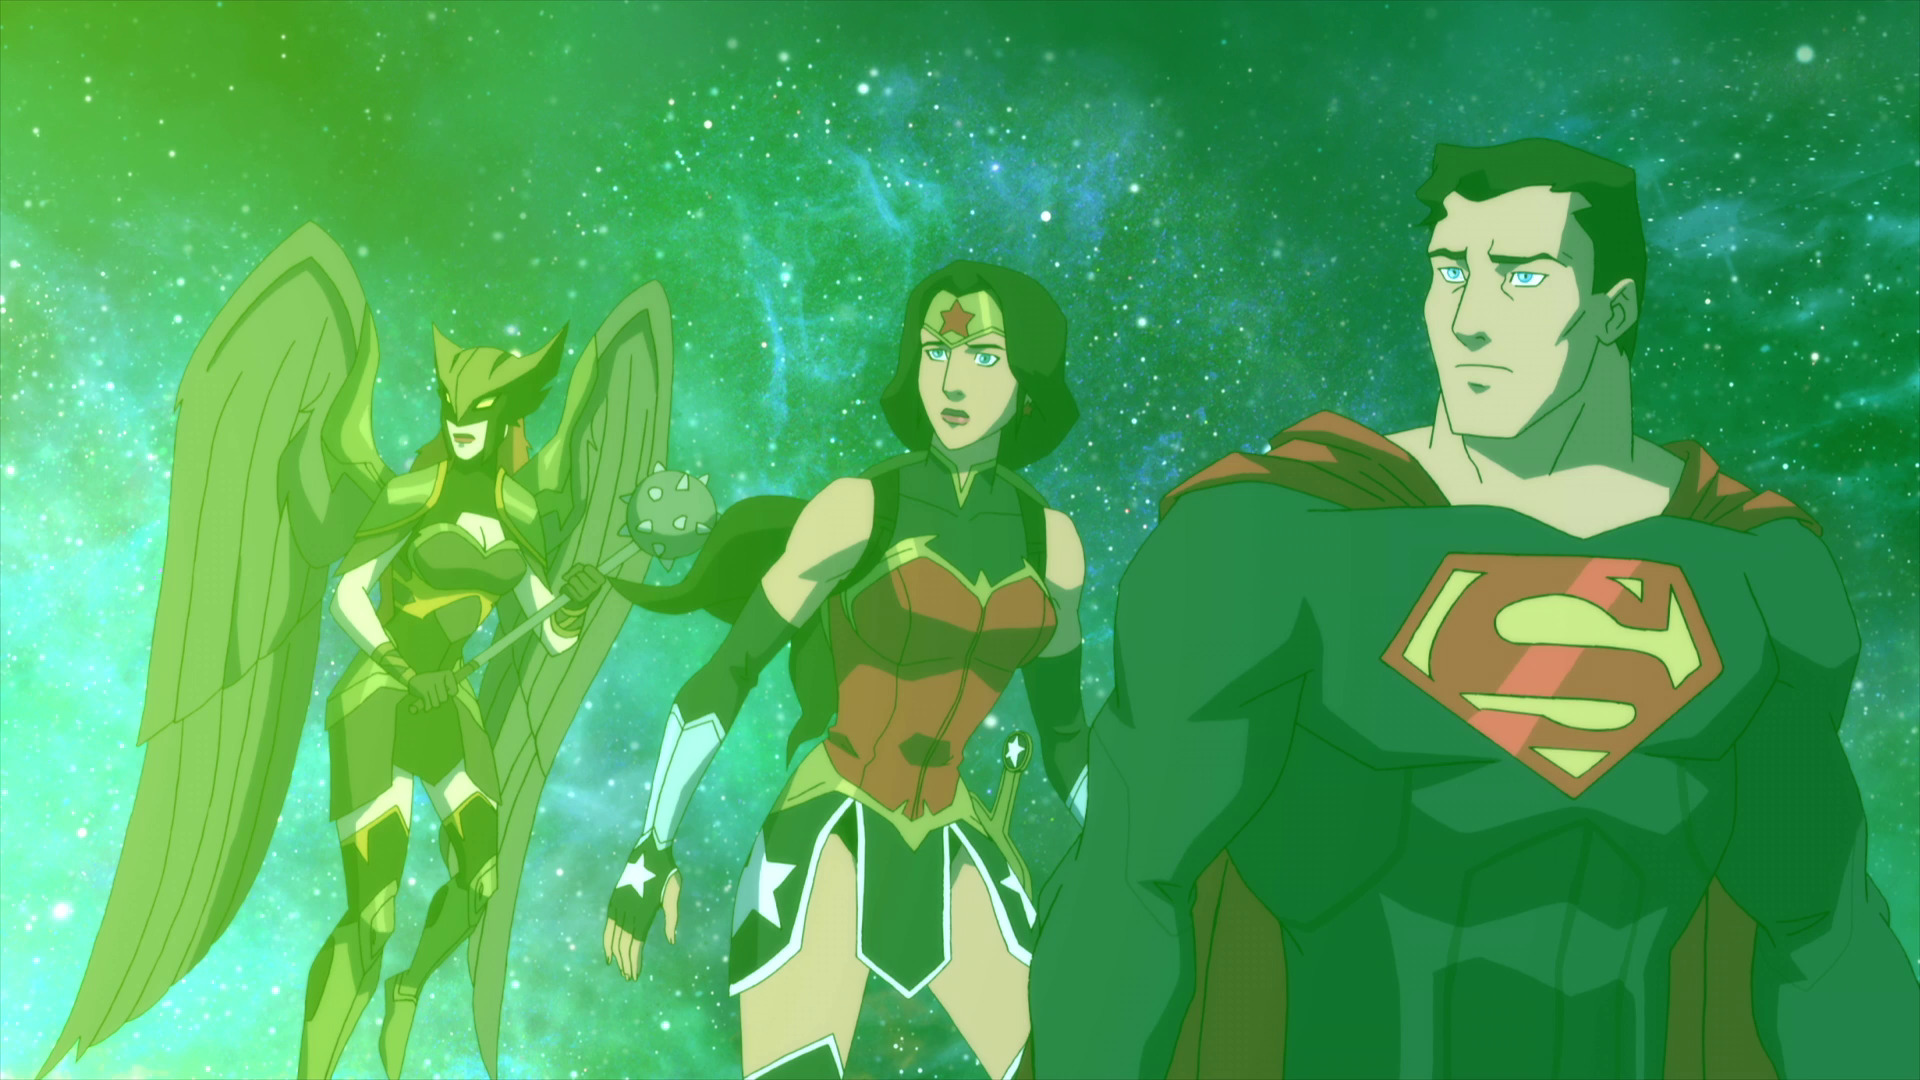 Young Justice Picture